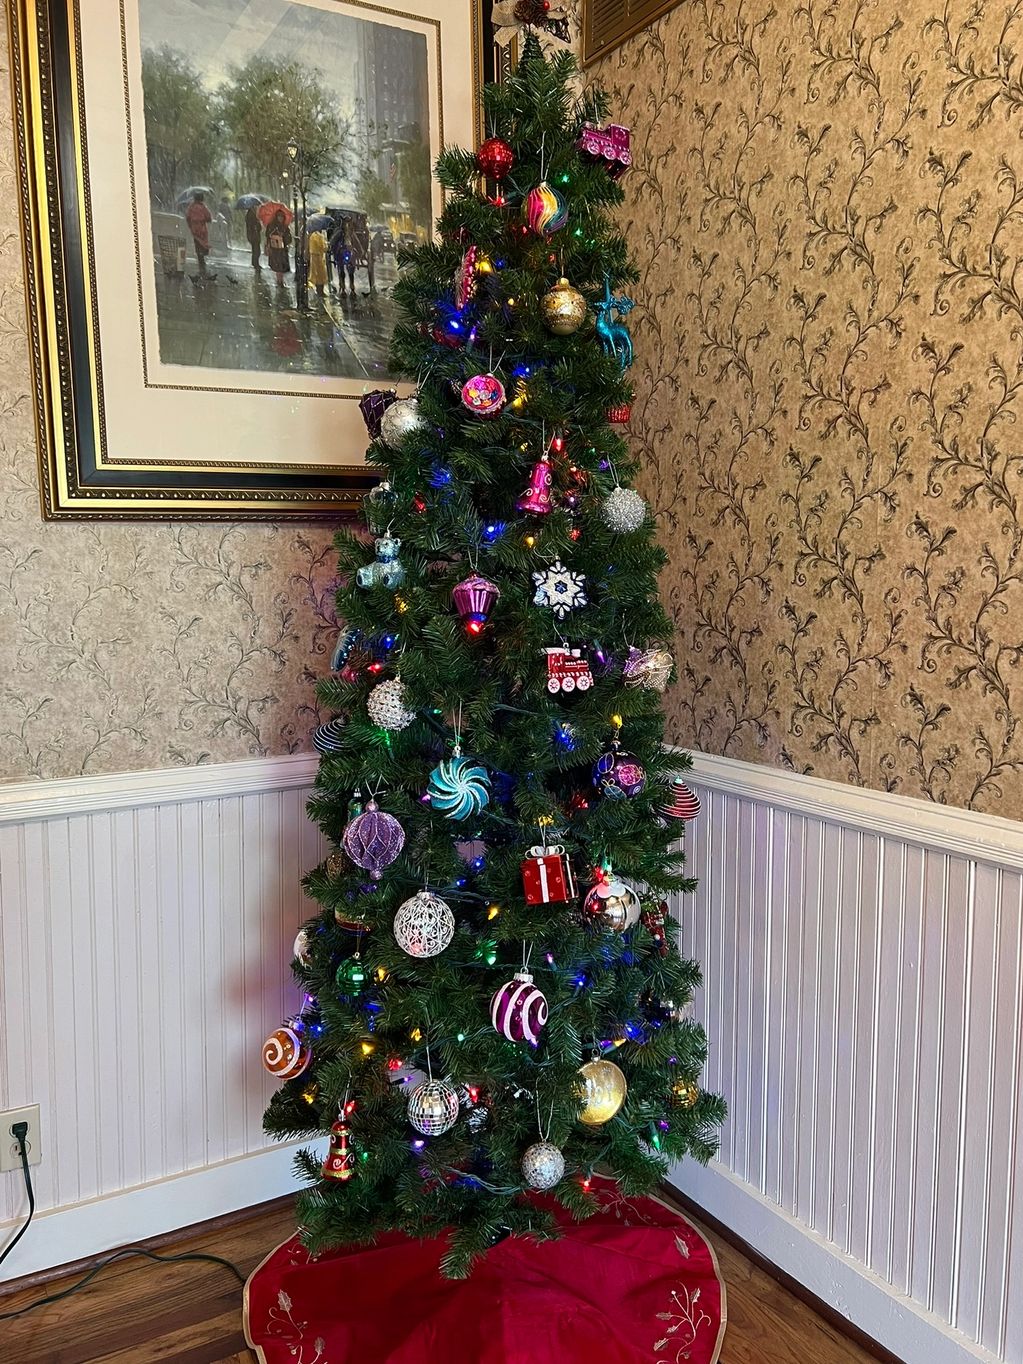 Christmas tree with brightly colored ornaments